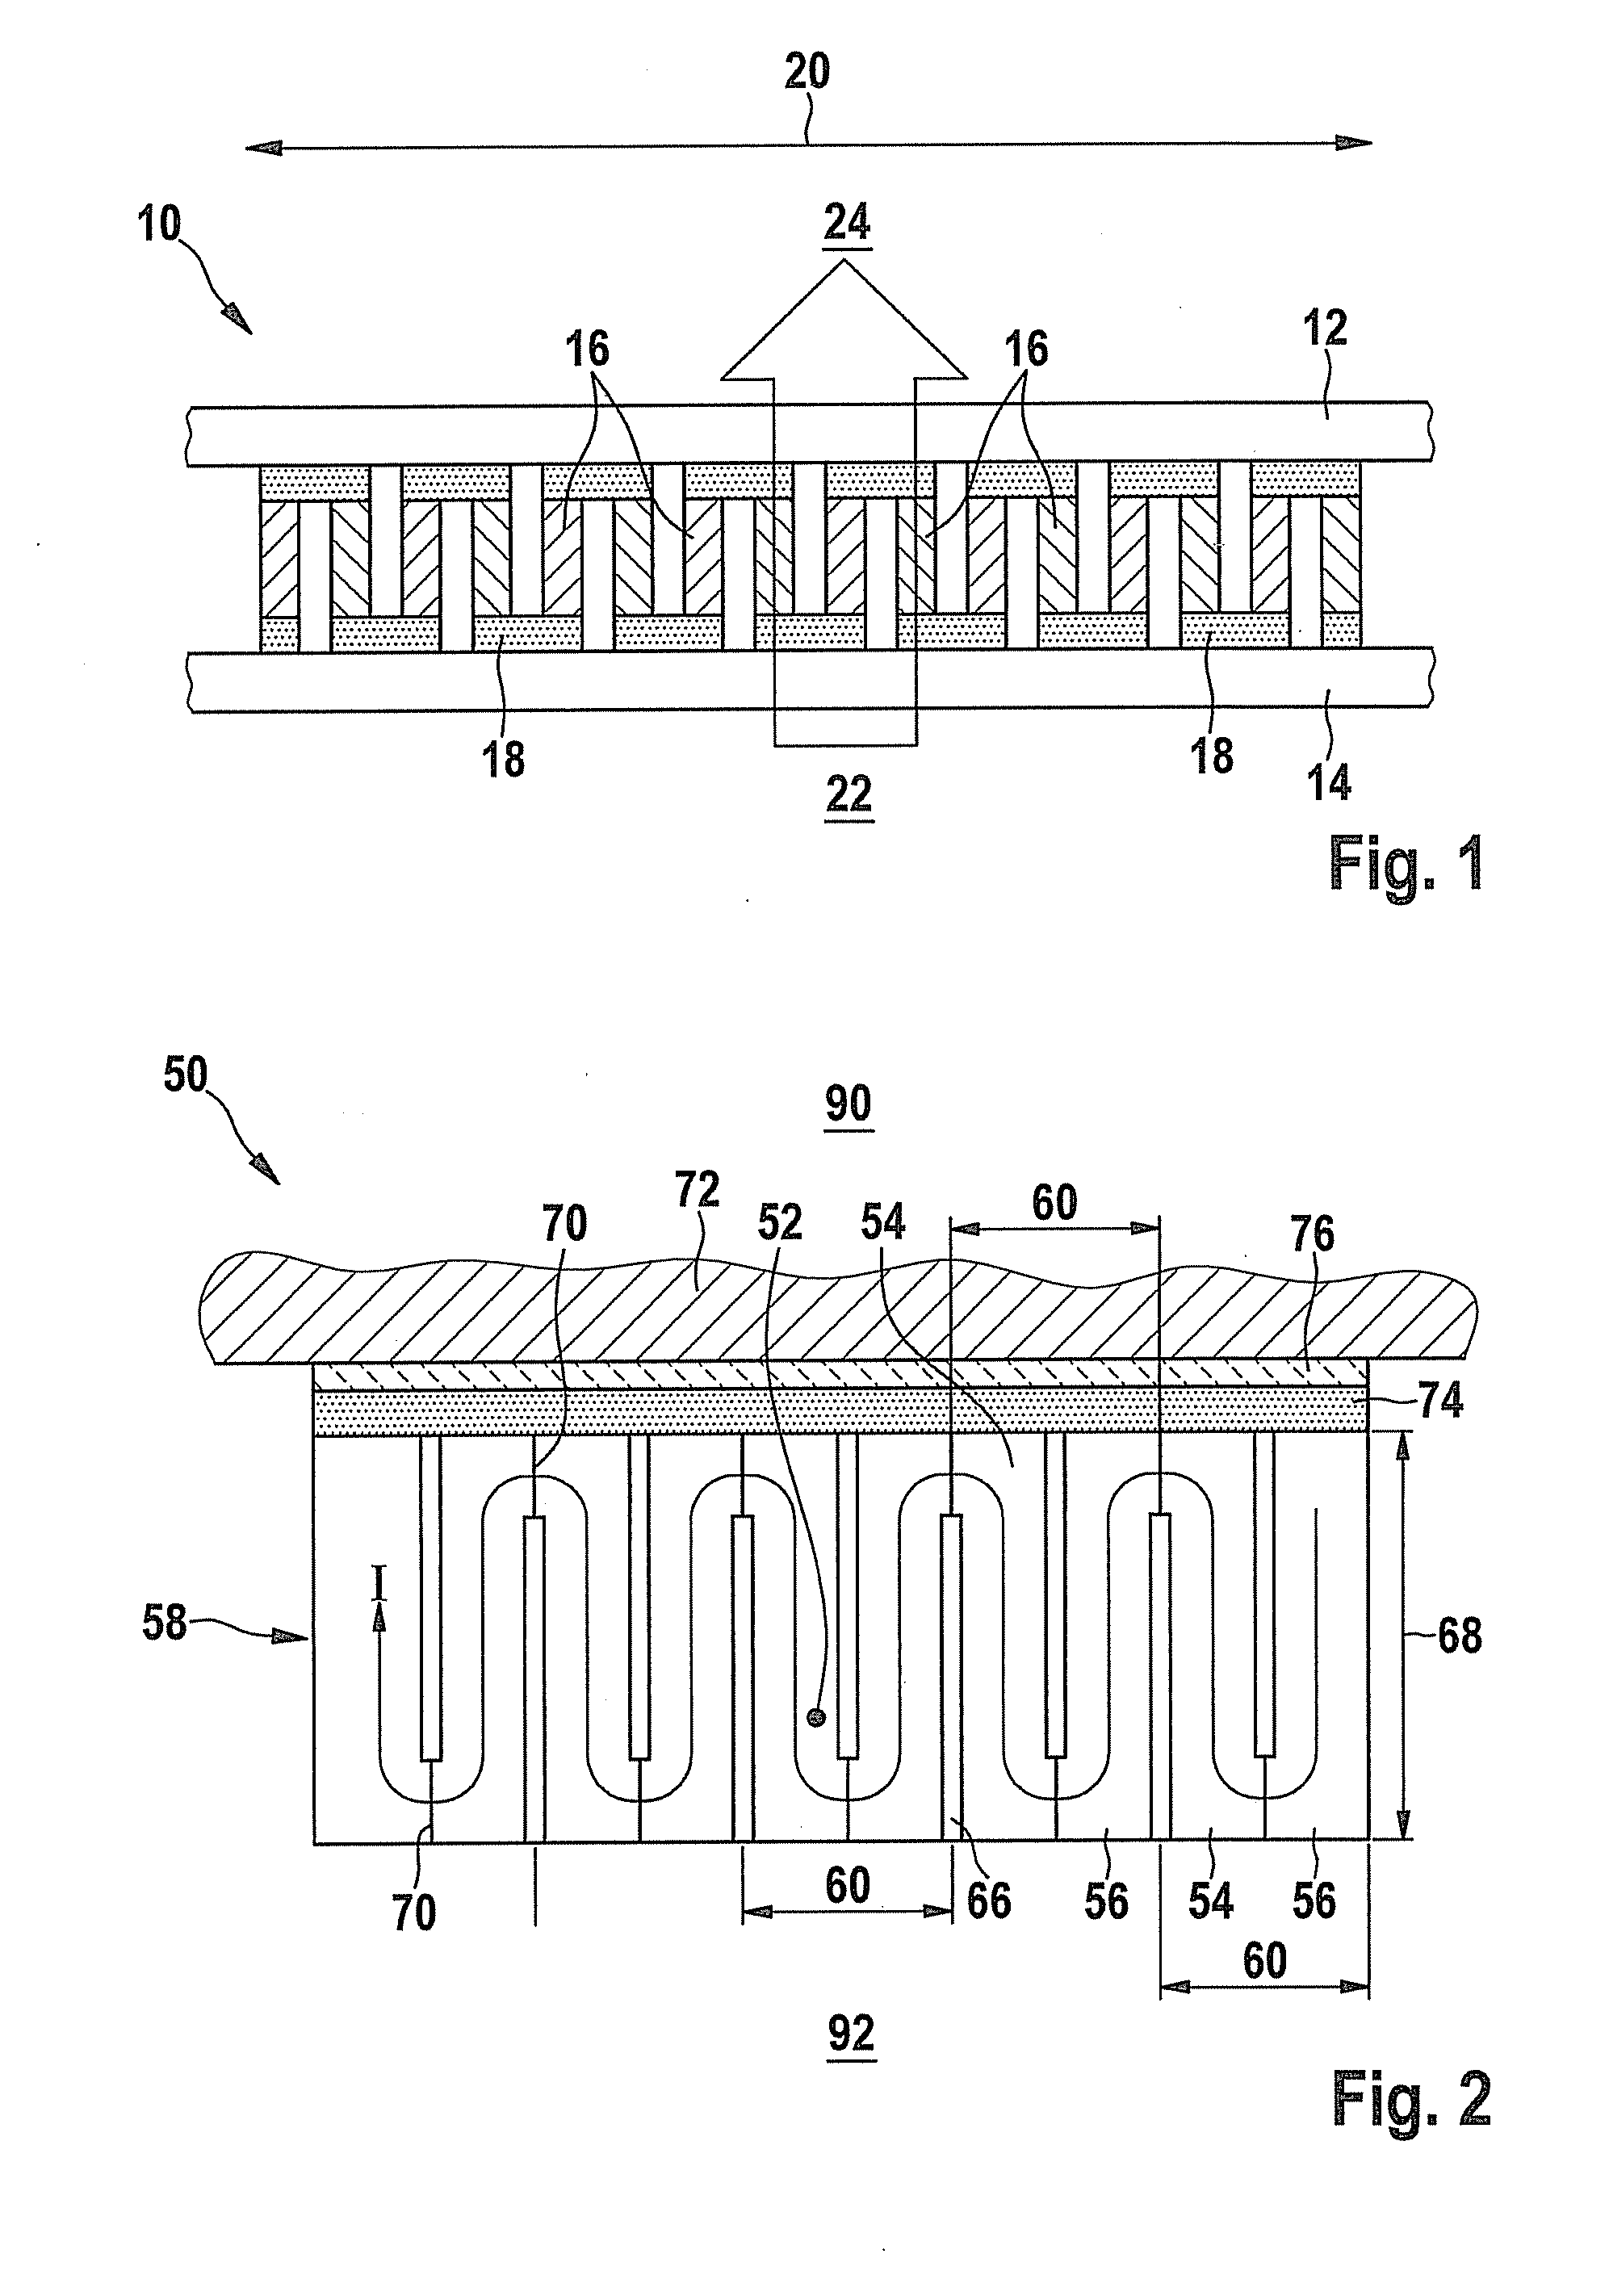 Thermoelectric generator including a thermoelectric module having a meandering p-n system